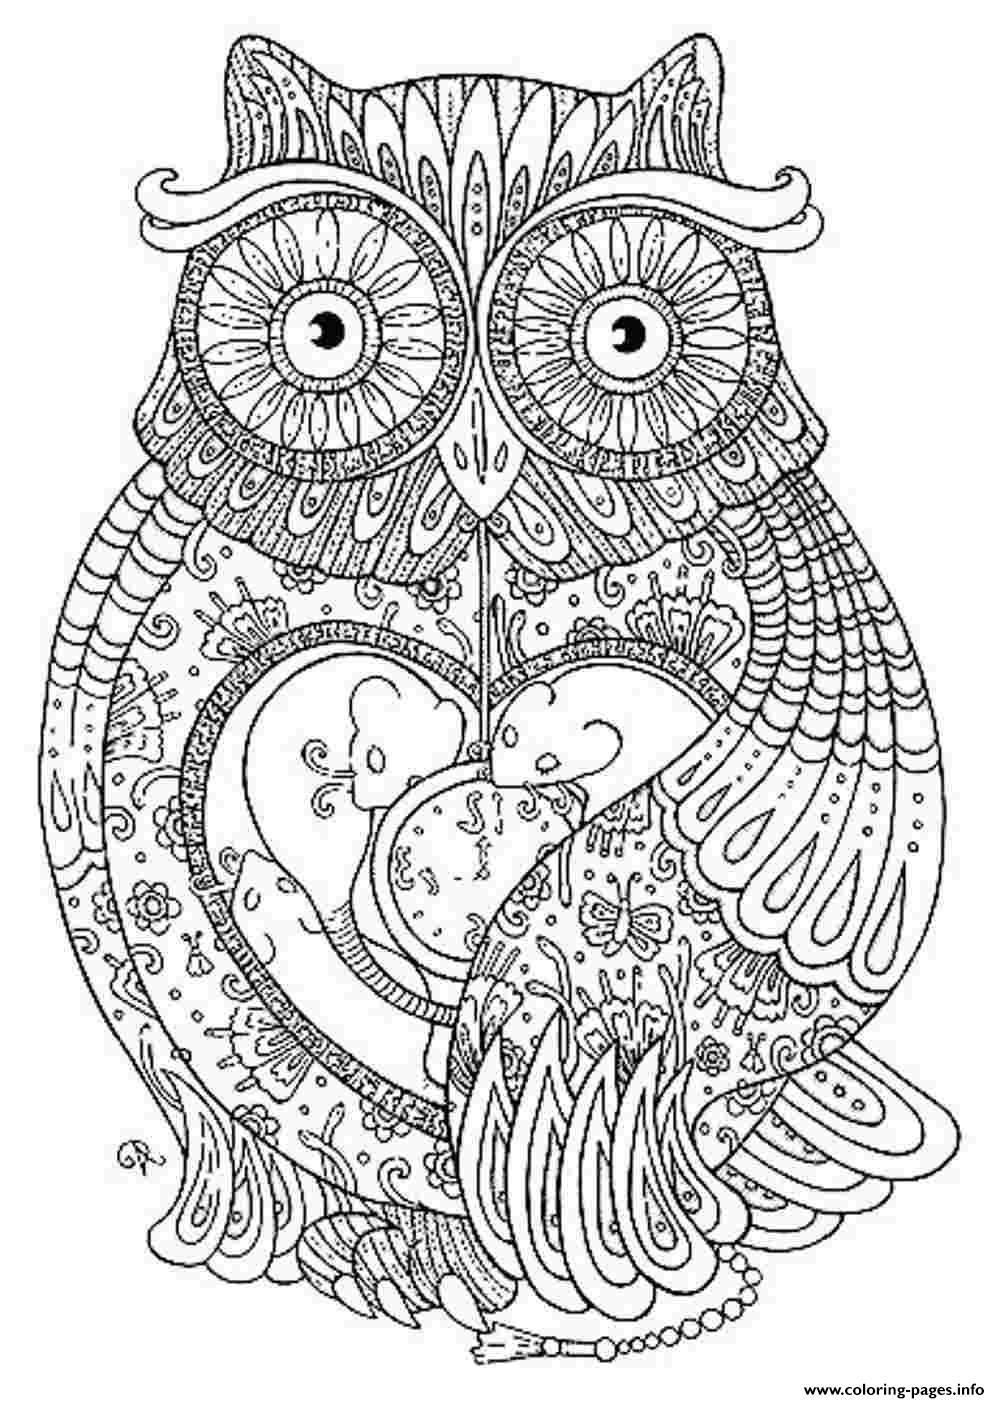 Print animal coloring pages for adults Coloring pages